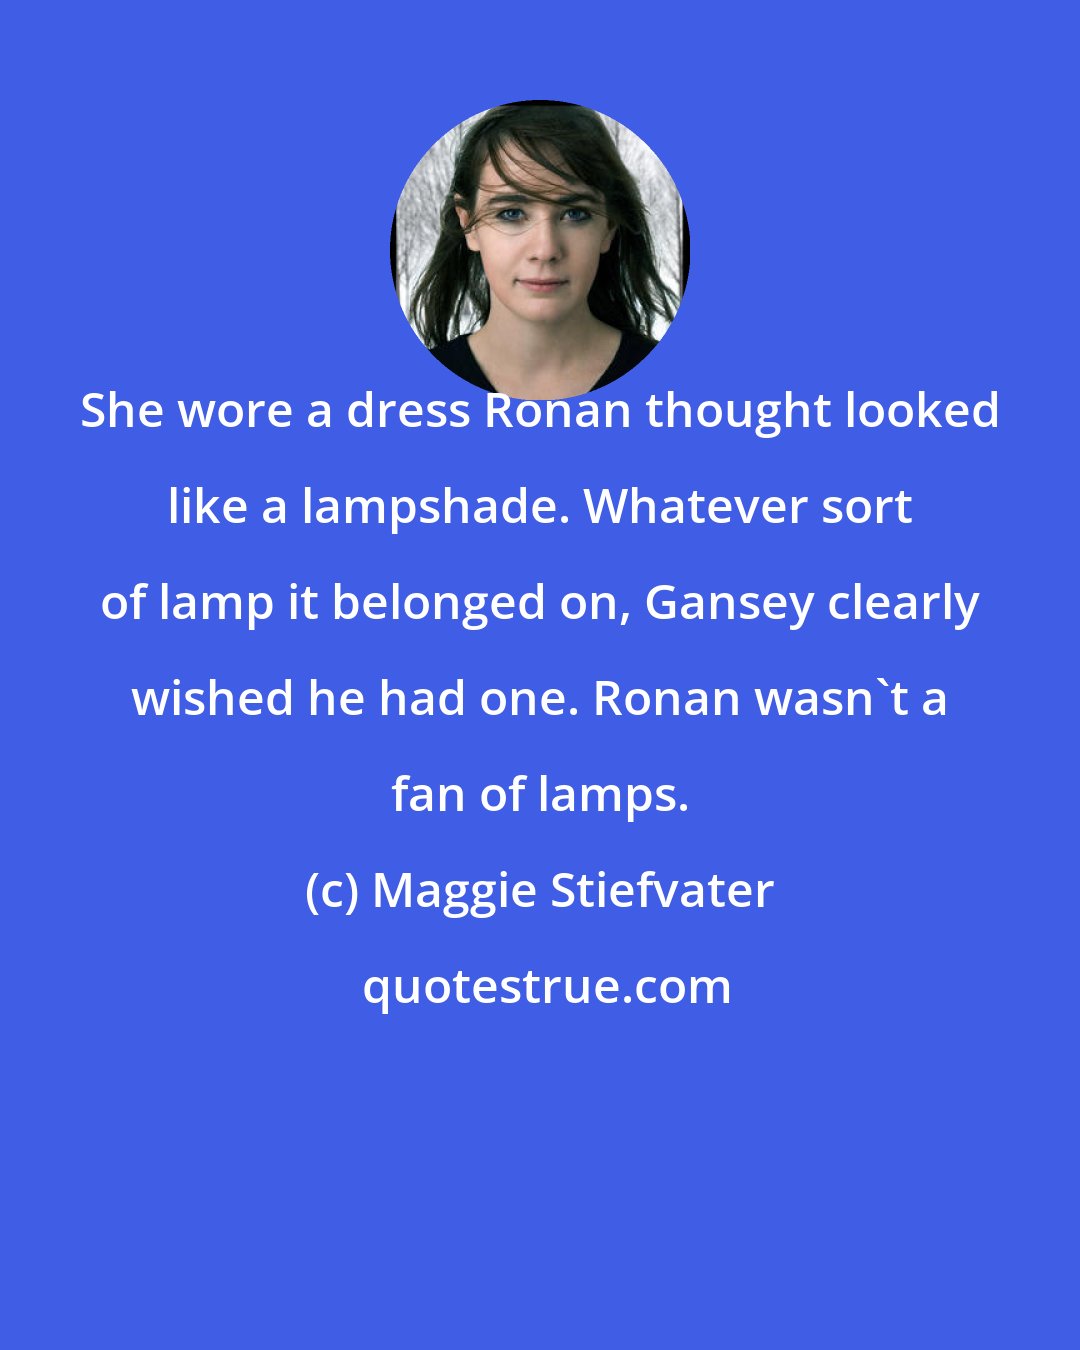 Maggie Stiefvater: She wore a dress Ronan thought looked like a lampshade. Whatever sort of lamp it belonged on, Gansey clearly wished he had one. Ronan wasn't a fan of lamps.